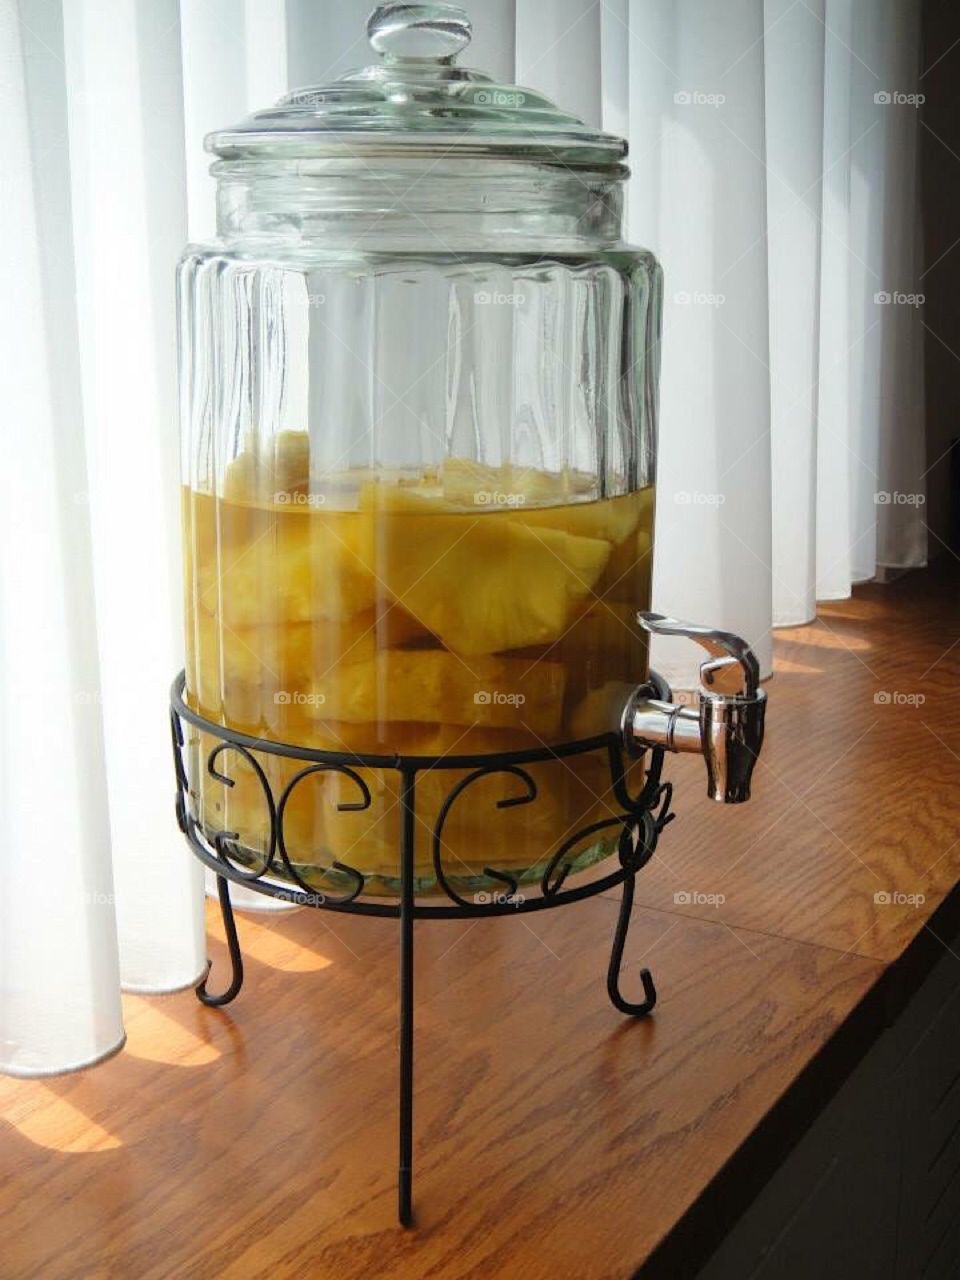 Pineapple infused tequila 